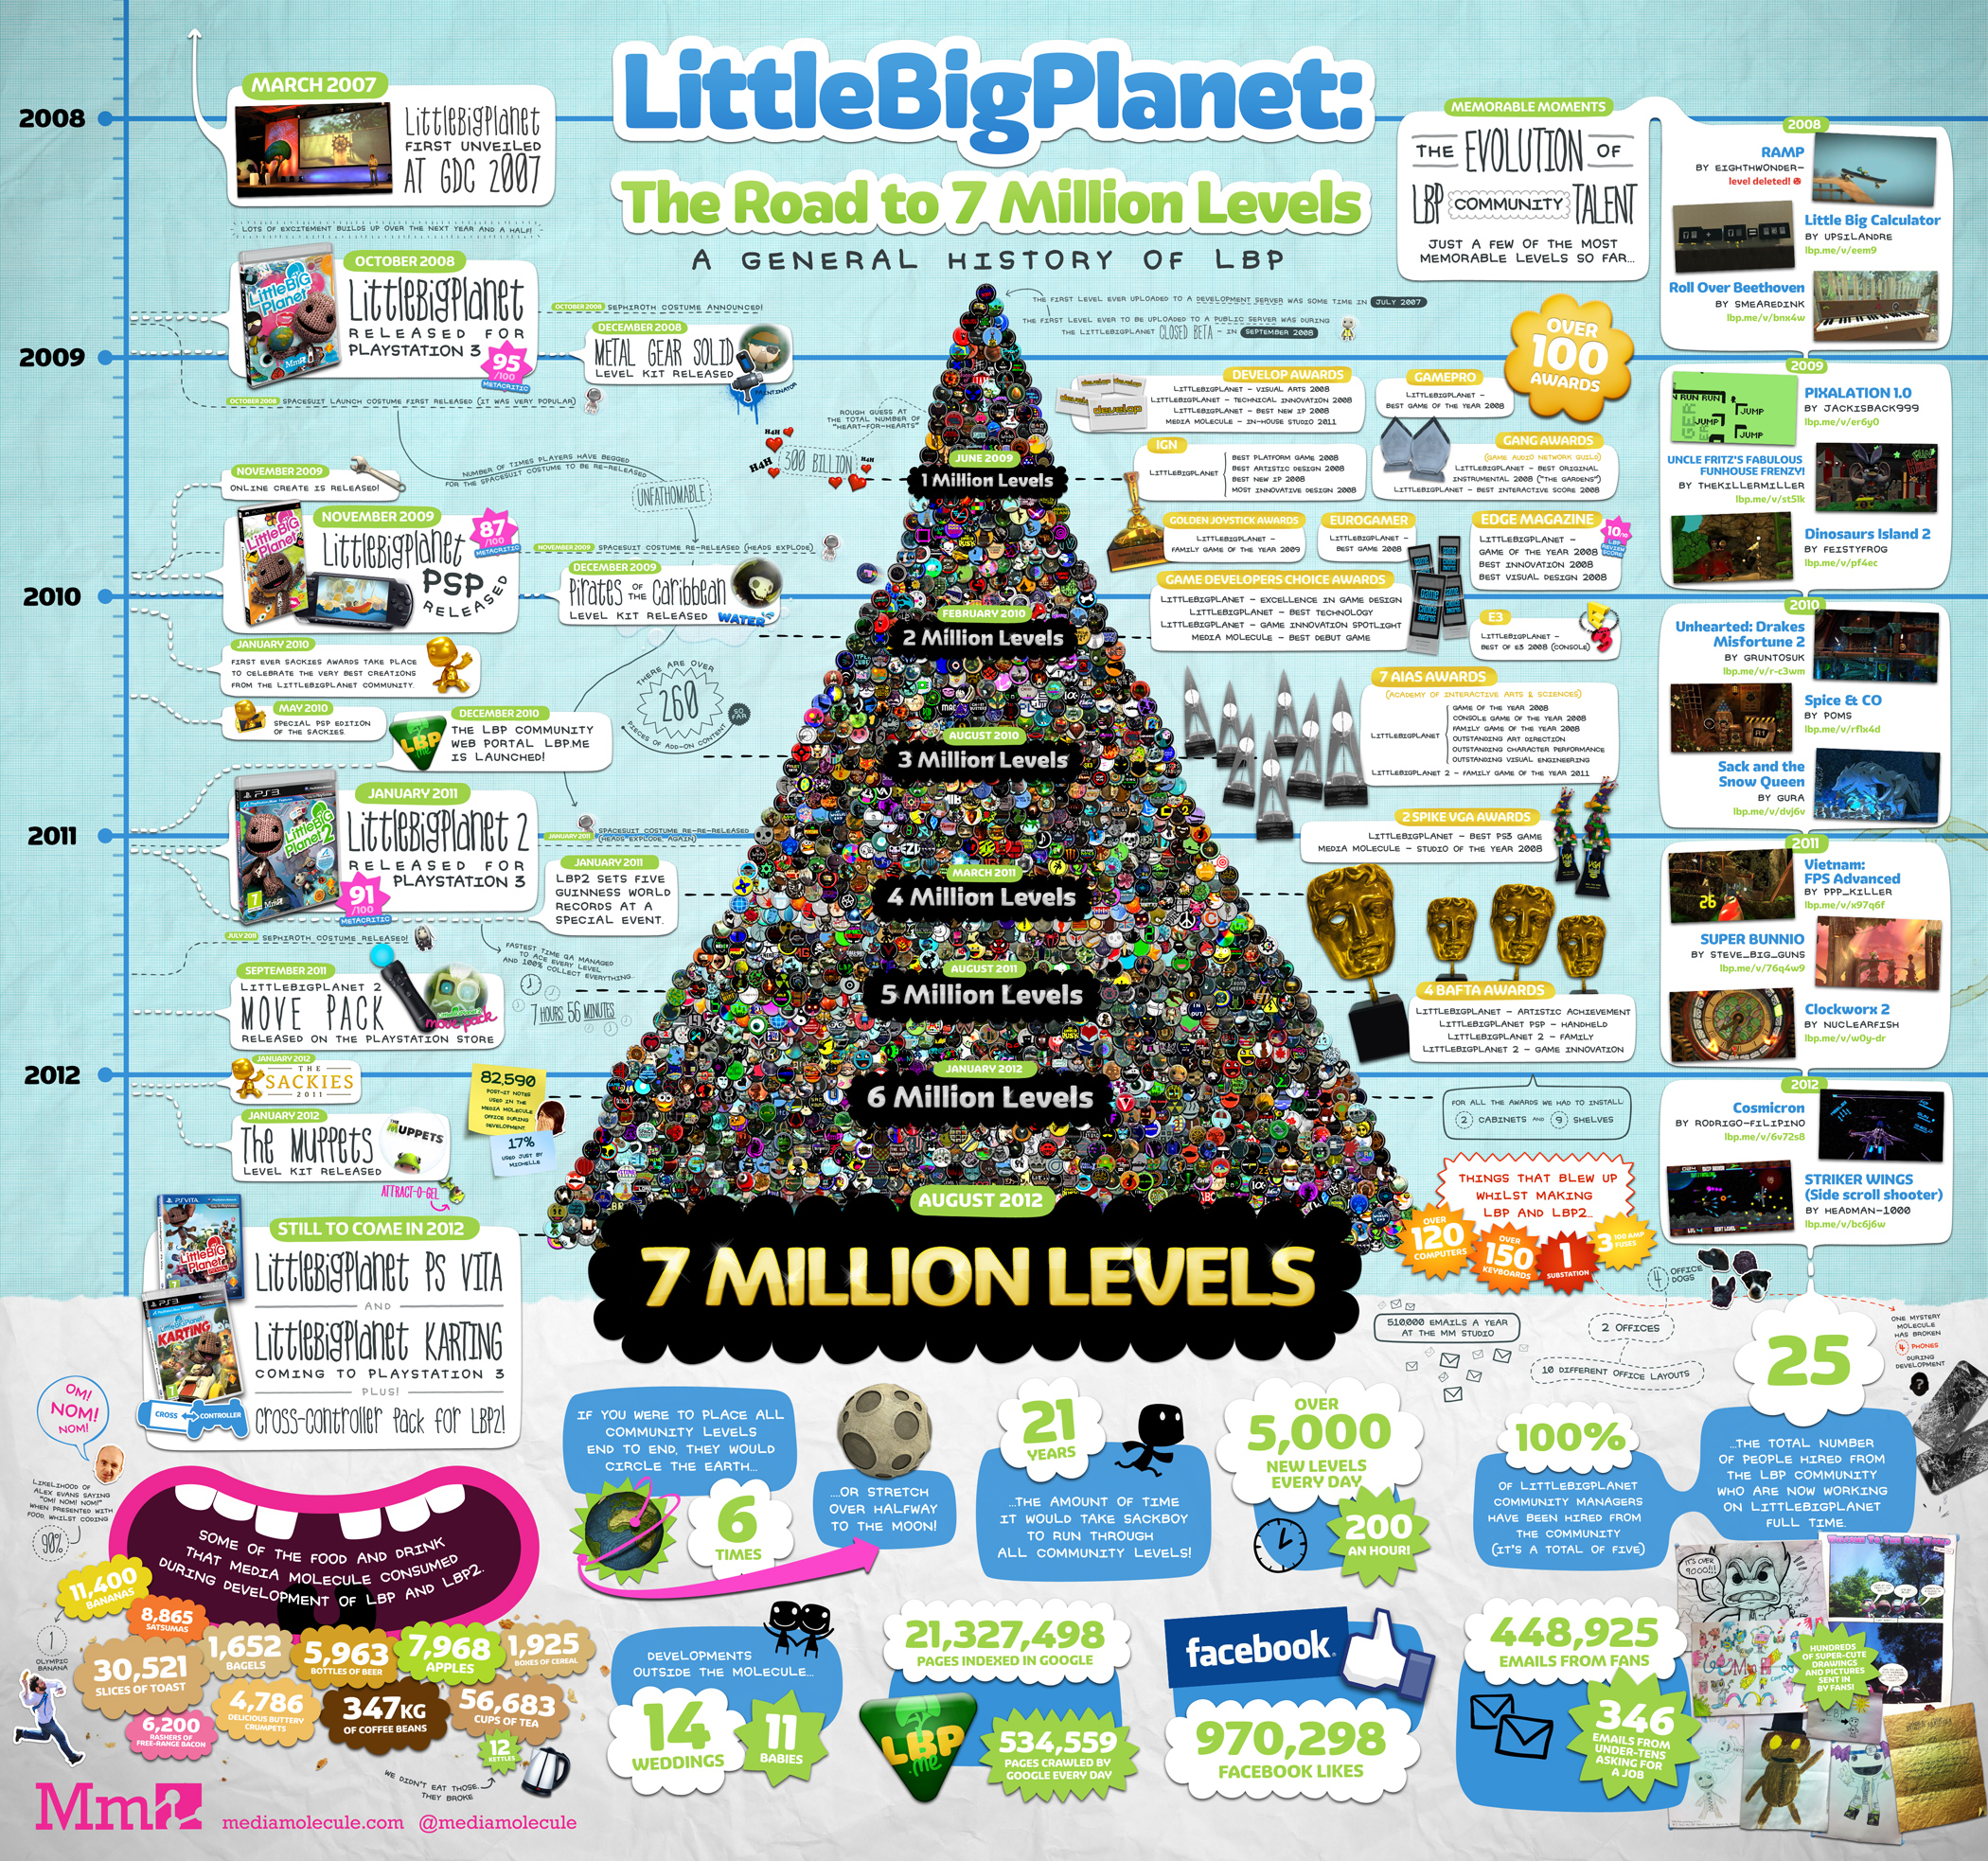 gaming_little_big_planet_infographic.jpg